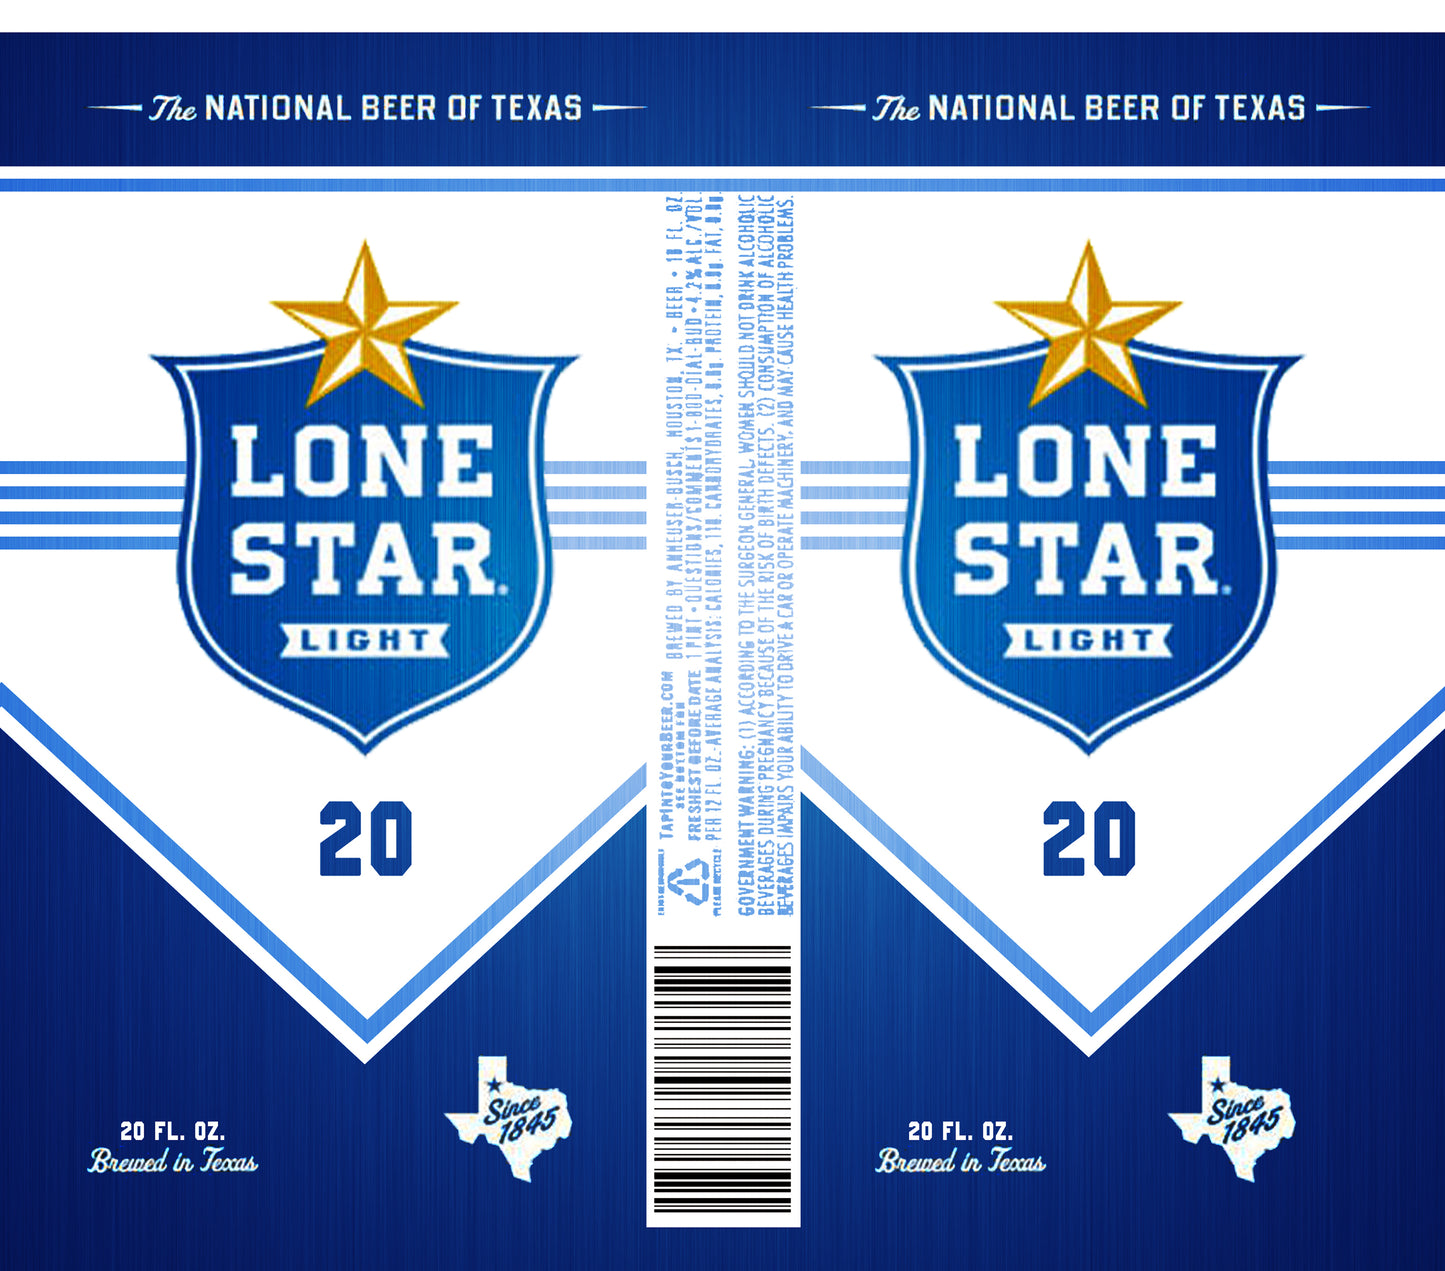 LONE STAR LIGHT CAN